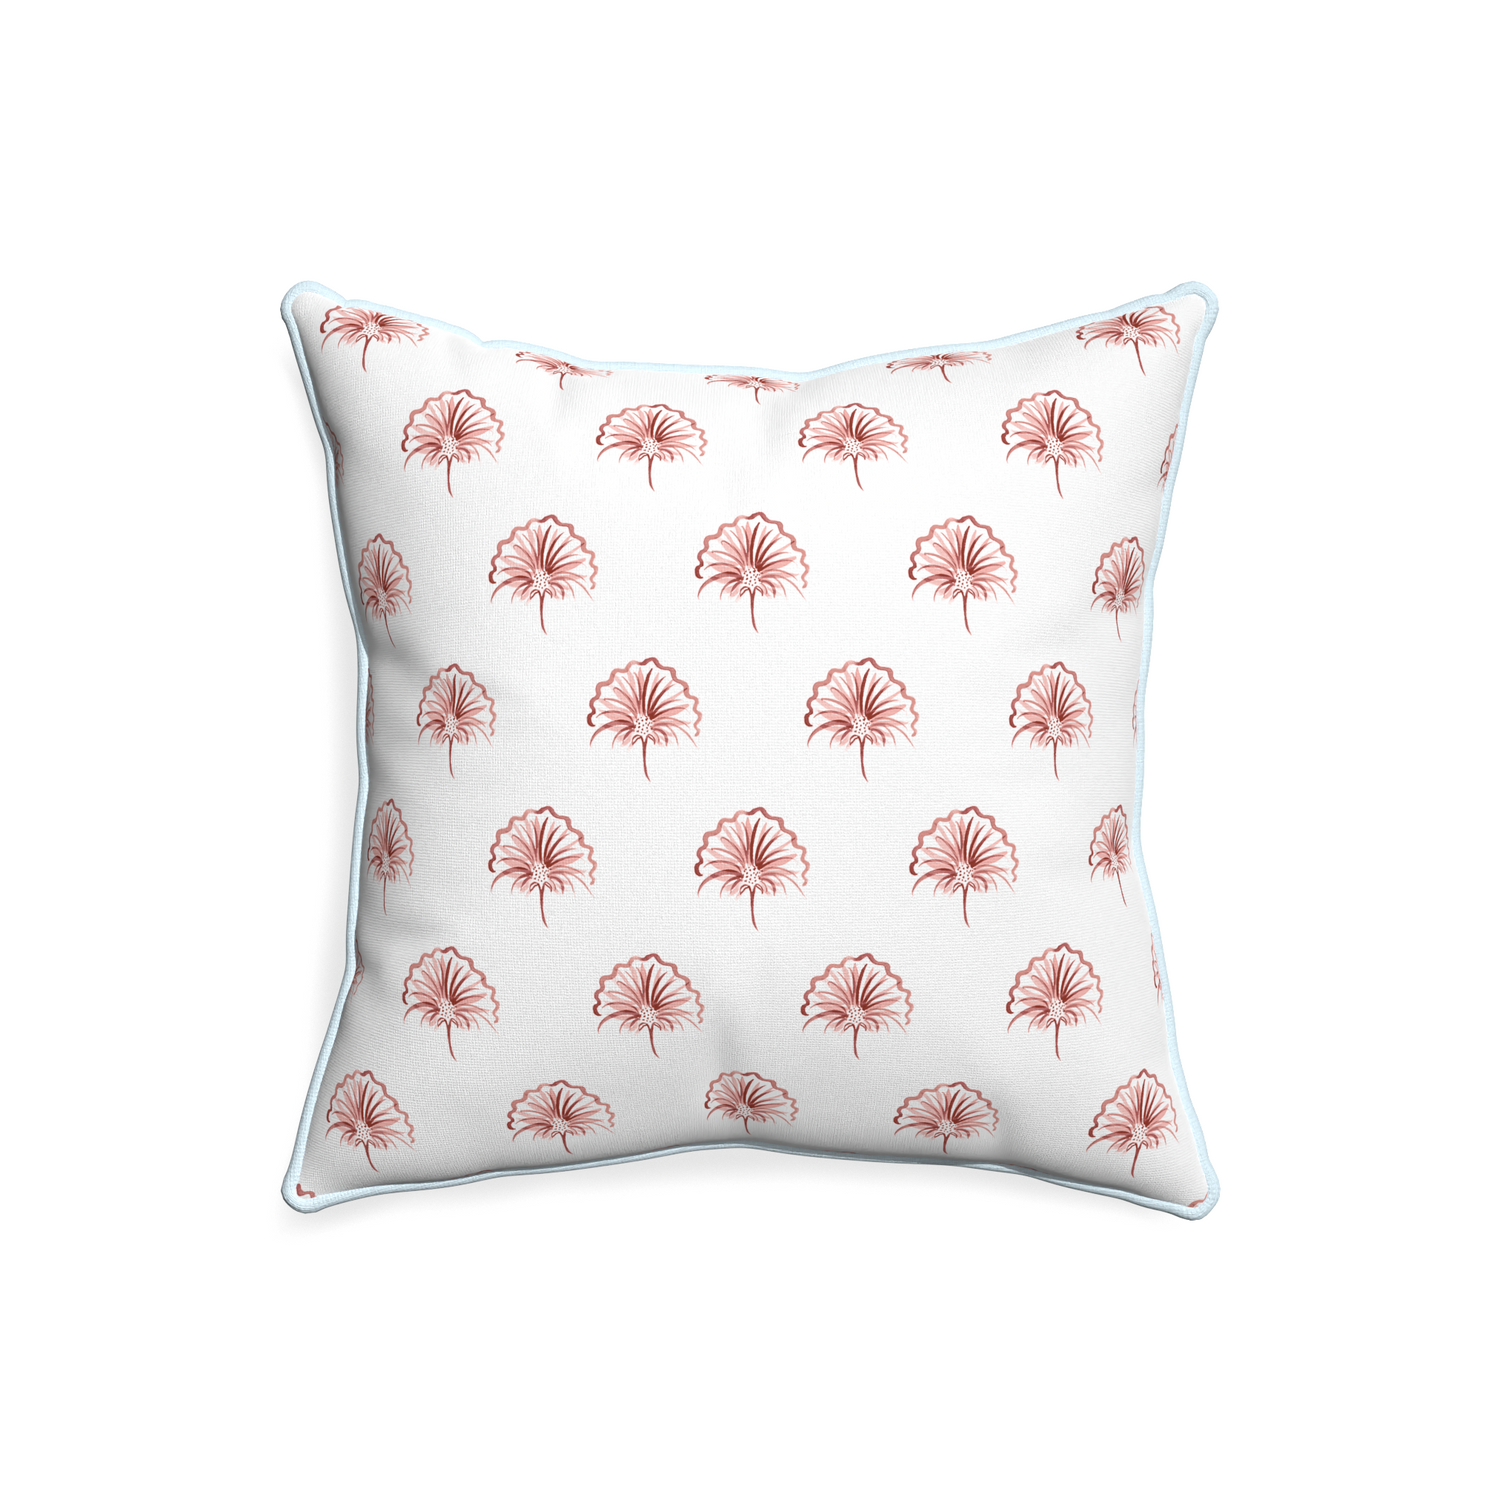 20-square penelope rose custom pillow with powder piping on white background